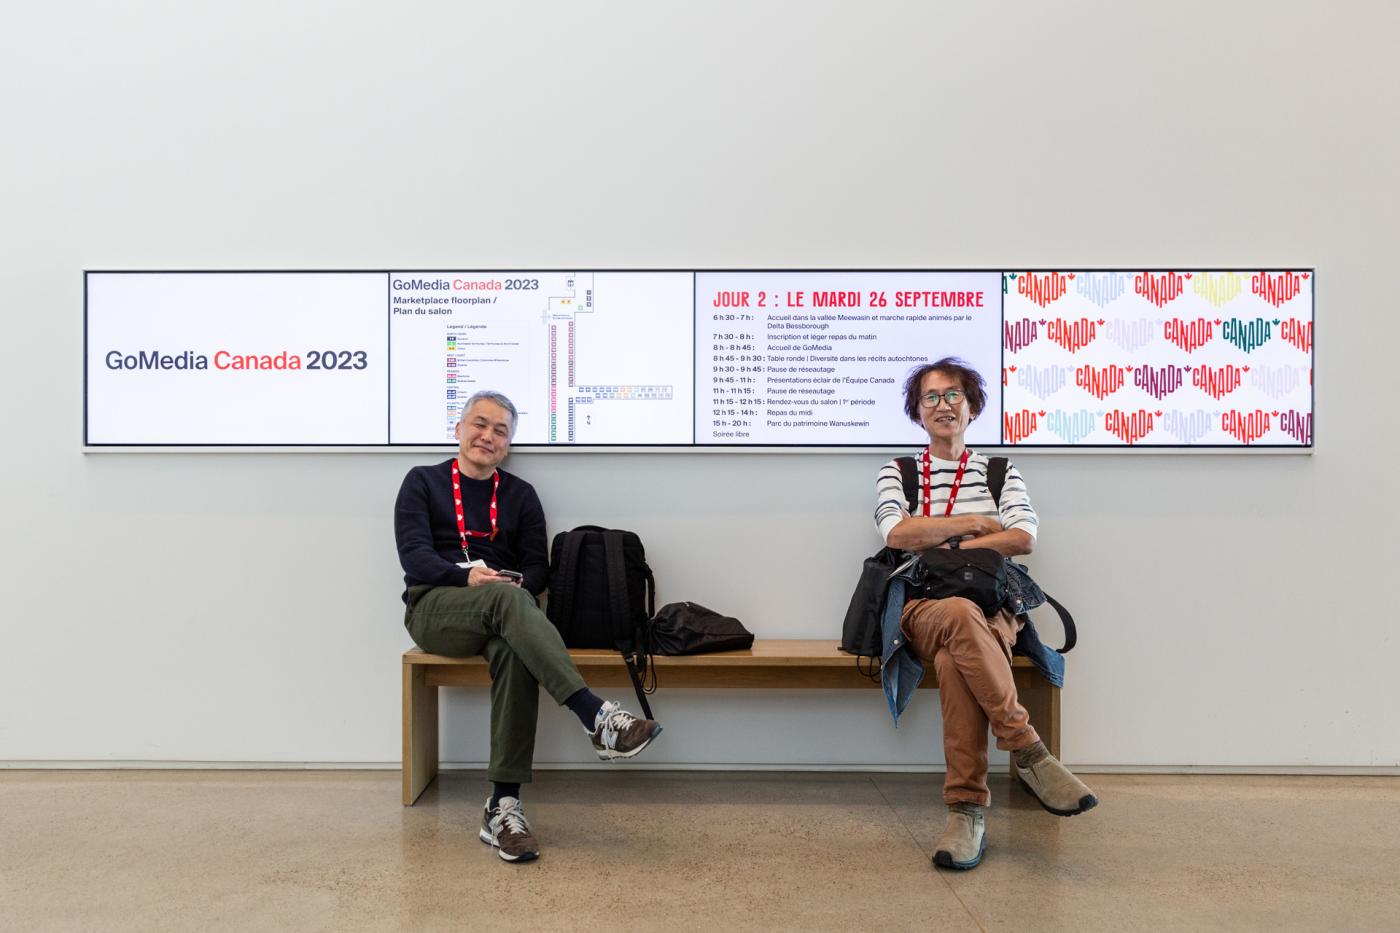 Two people sit on a bench in front of 4 side-by-side TV monitors that have branded event information on them.